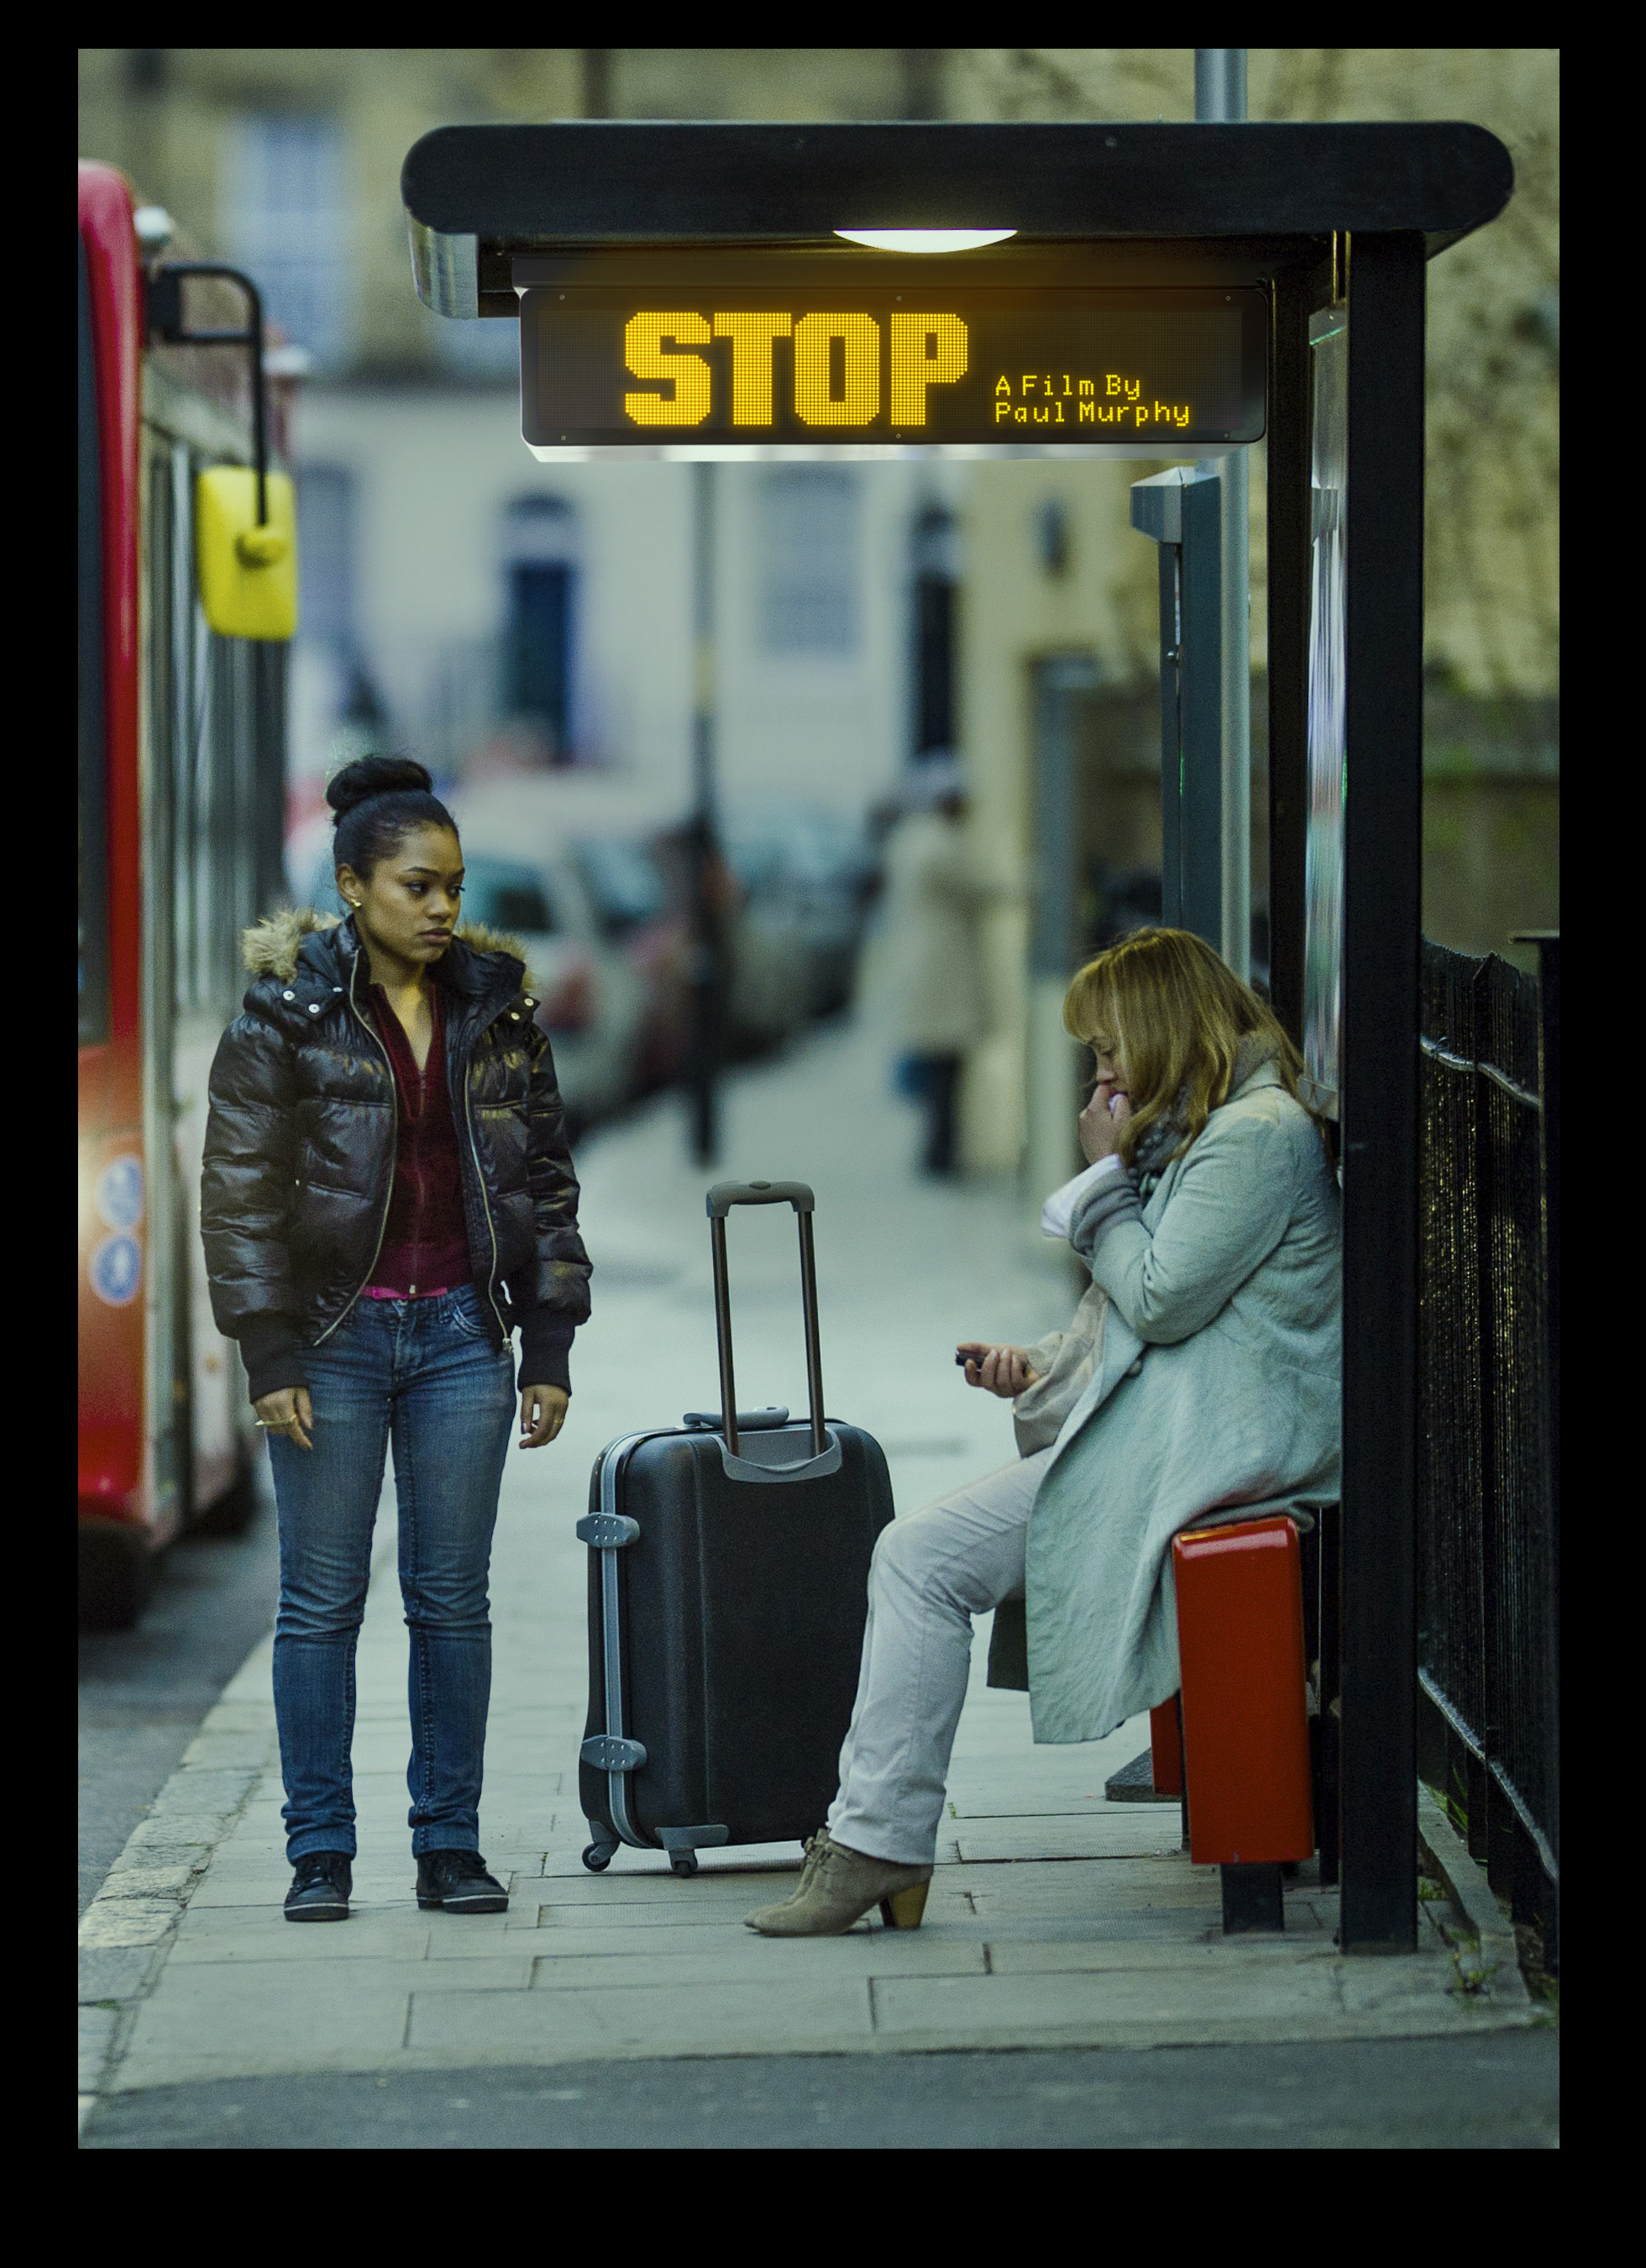 'Stop' a short film written and directed by Paul Murphy